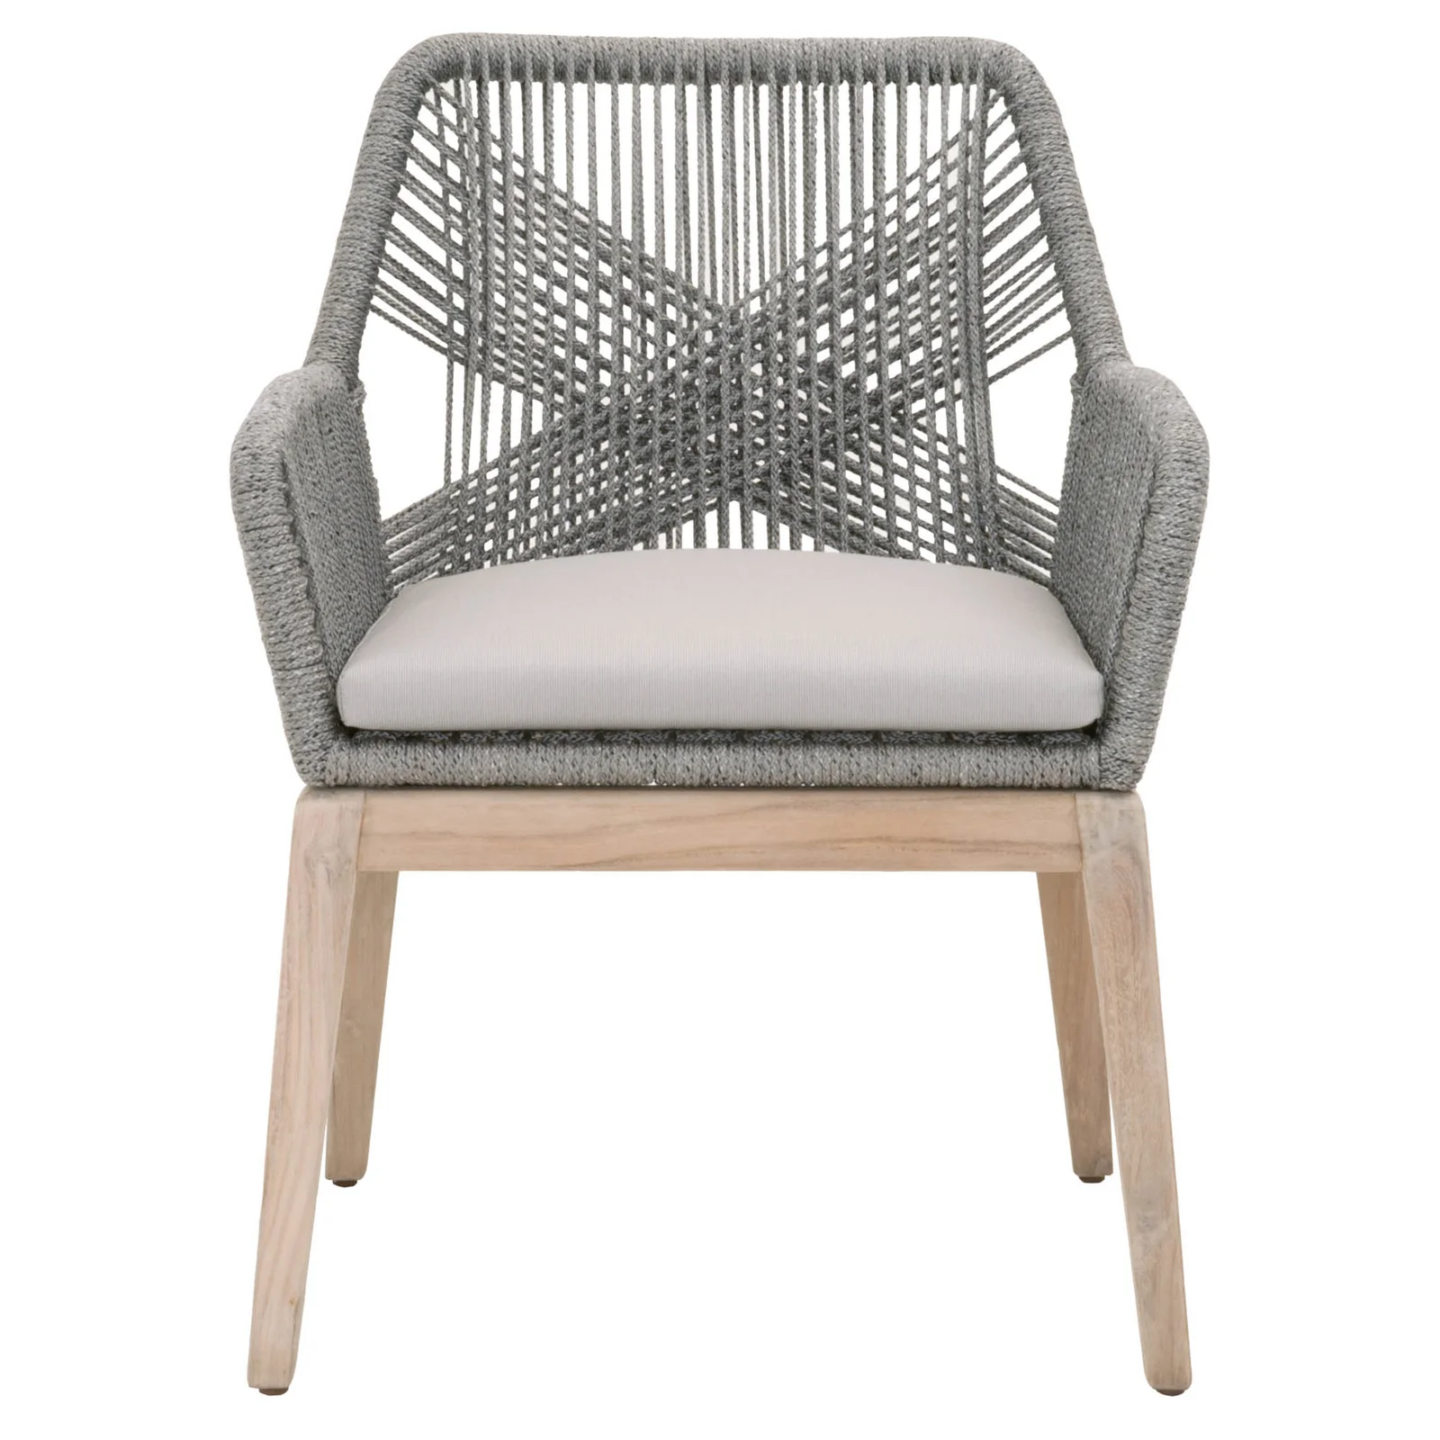 Rosamund woven rope arm chair, set of 2 from All Modern